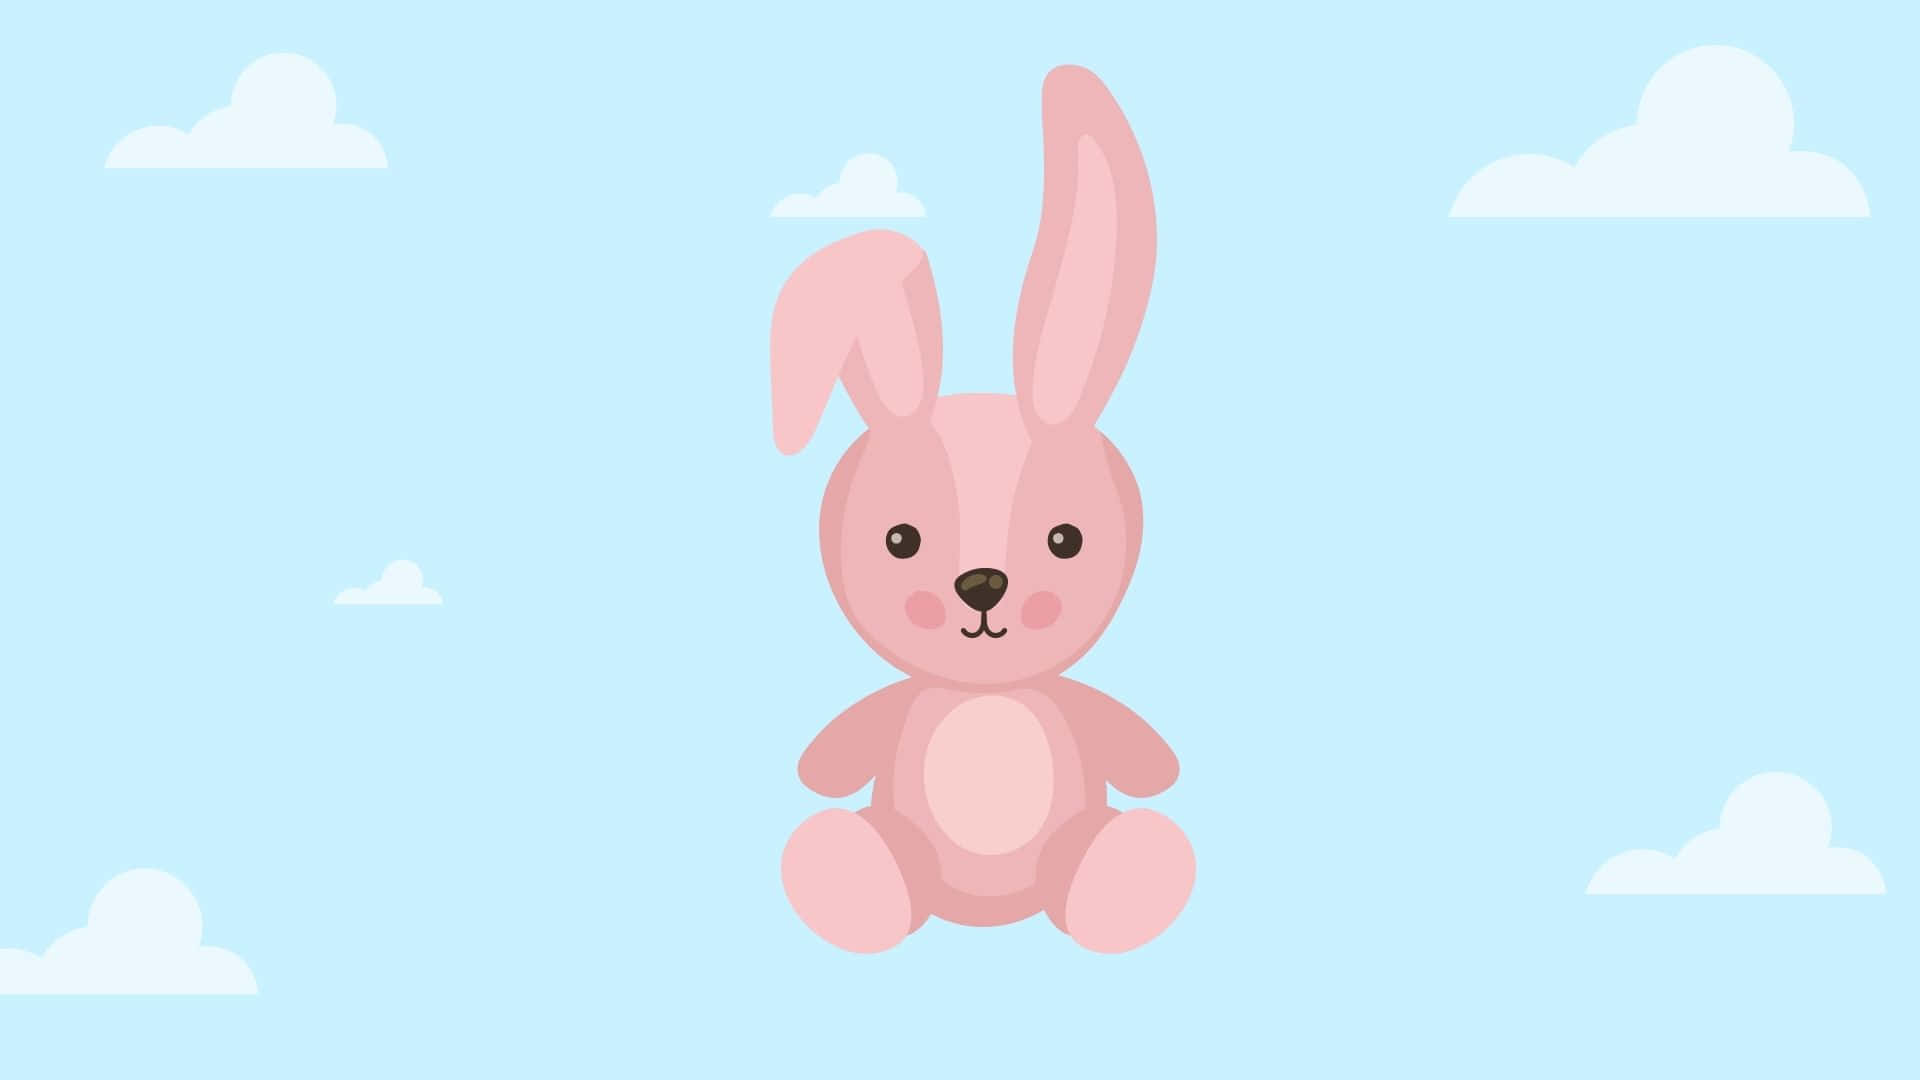 A bright and friendly Pink Bunny Wallpaper